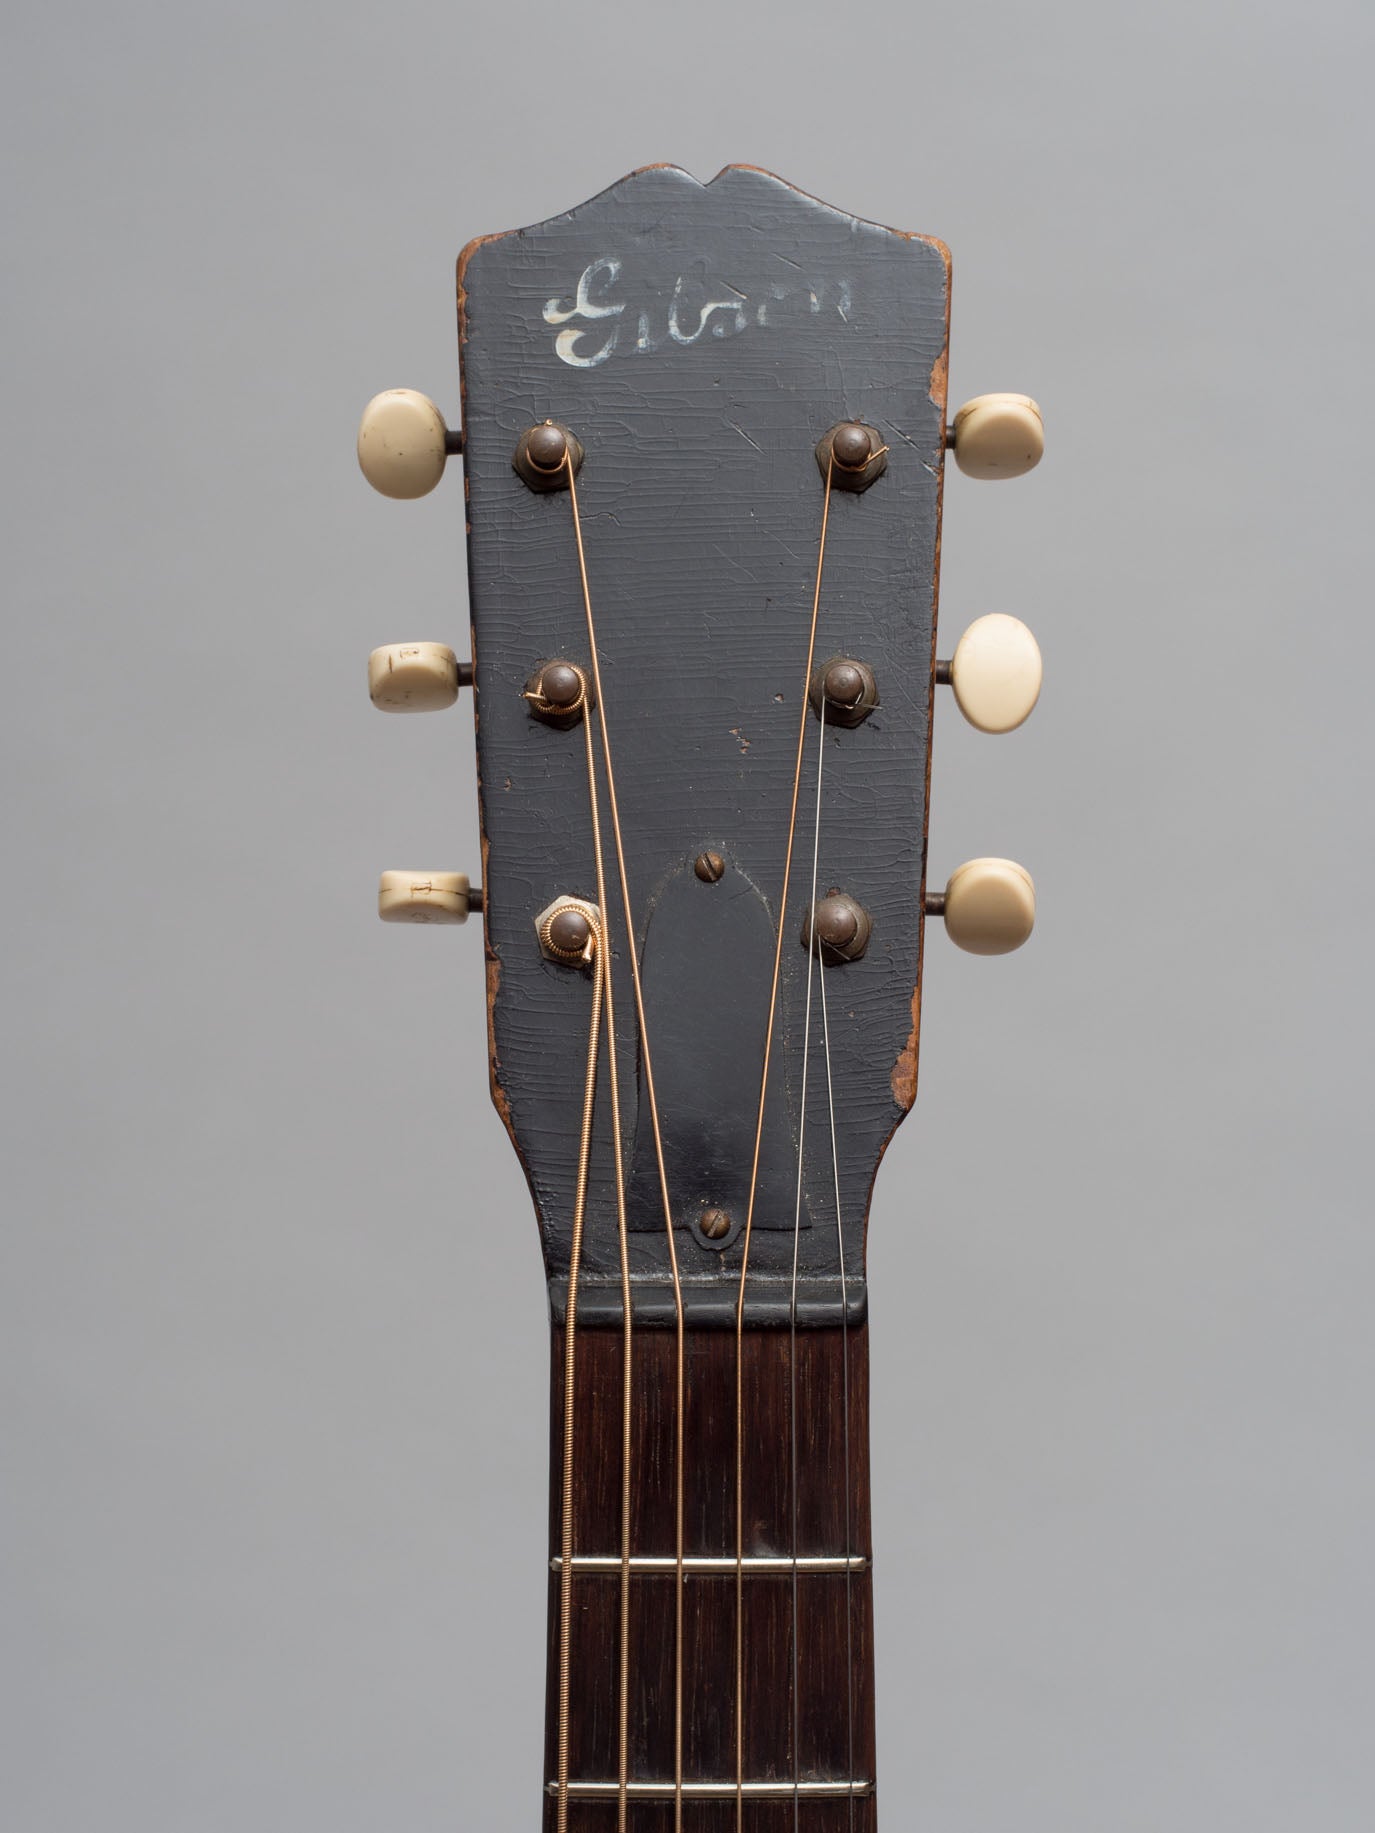 1936 Gibson L-00